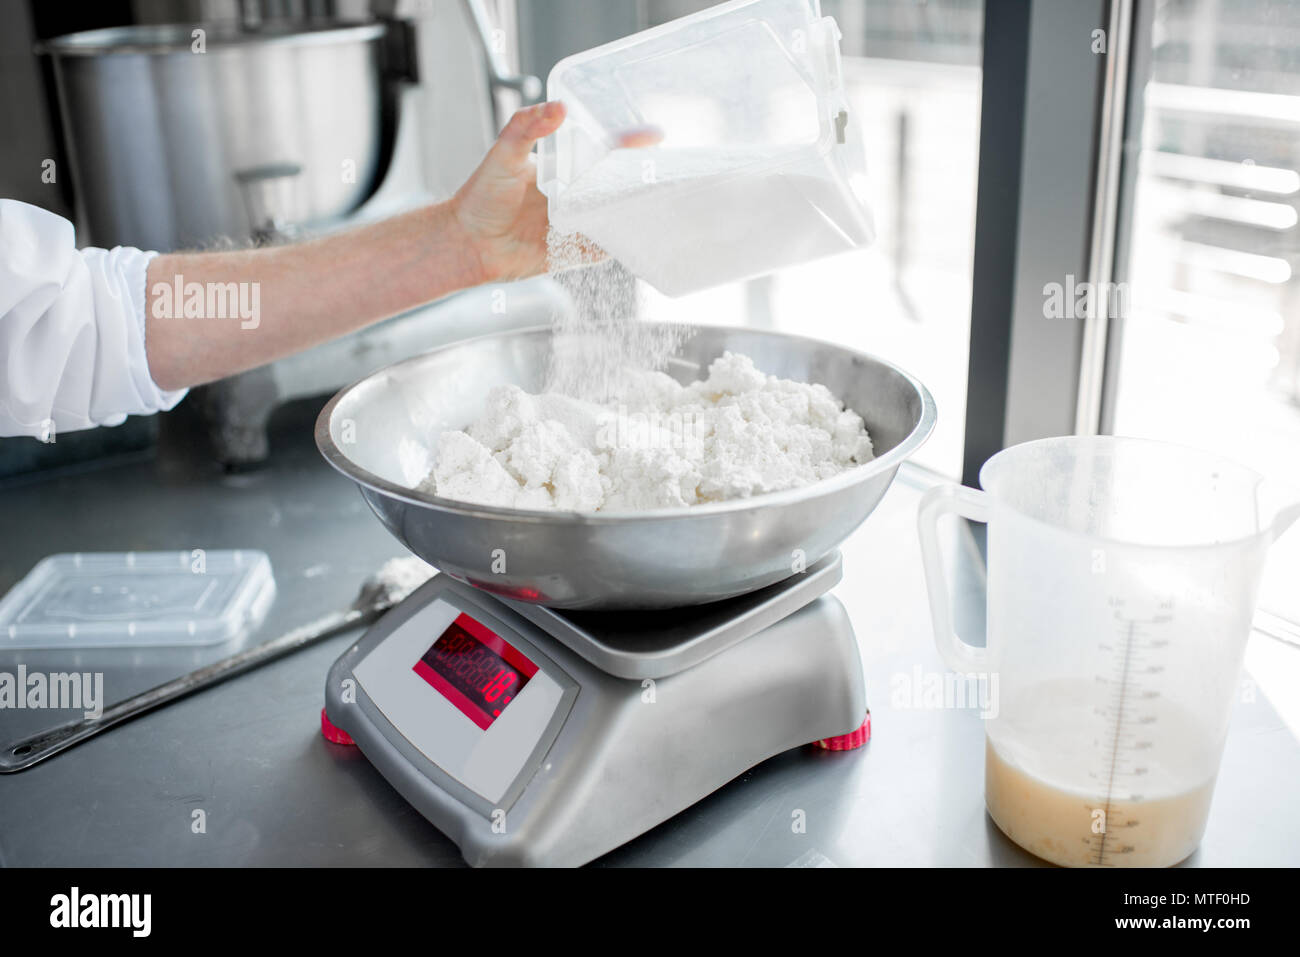 Weighing ingredients for baking with professional scales Stock Photo